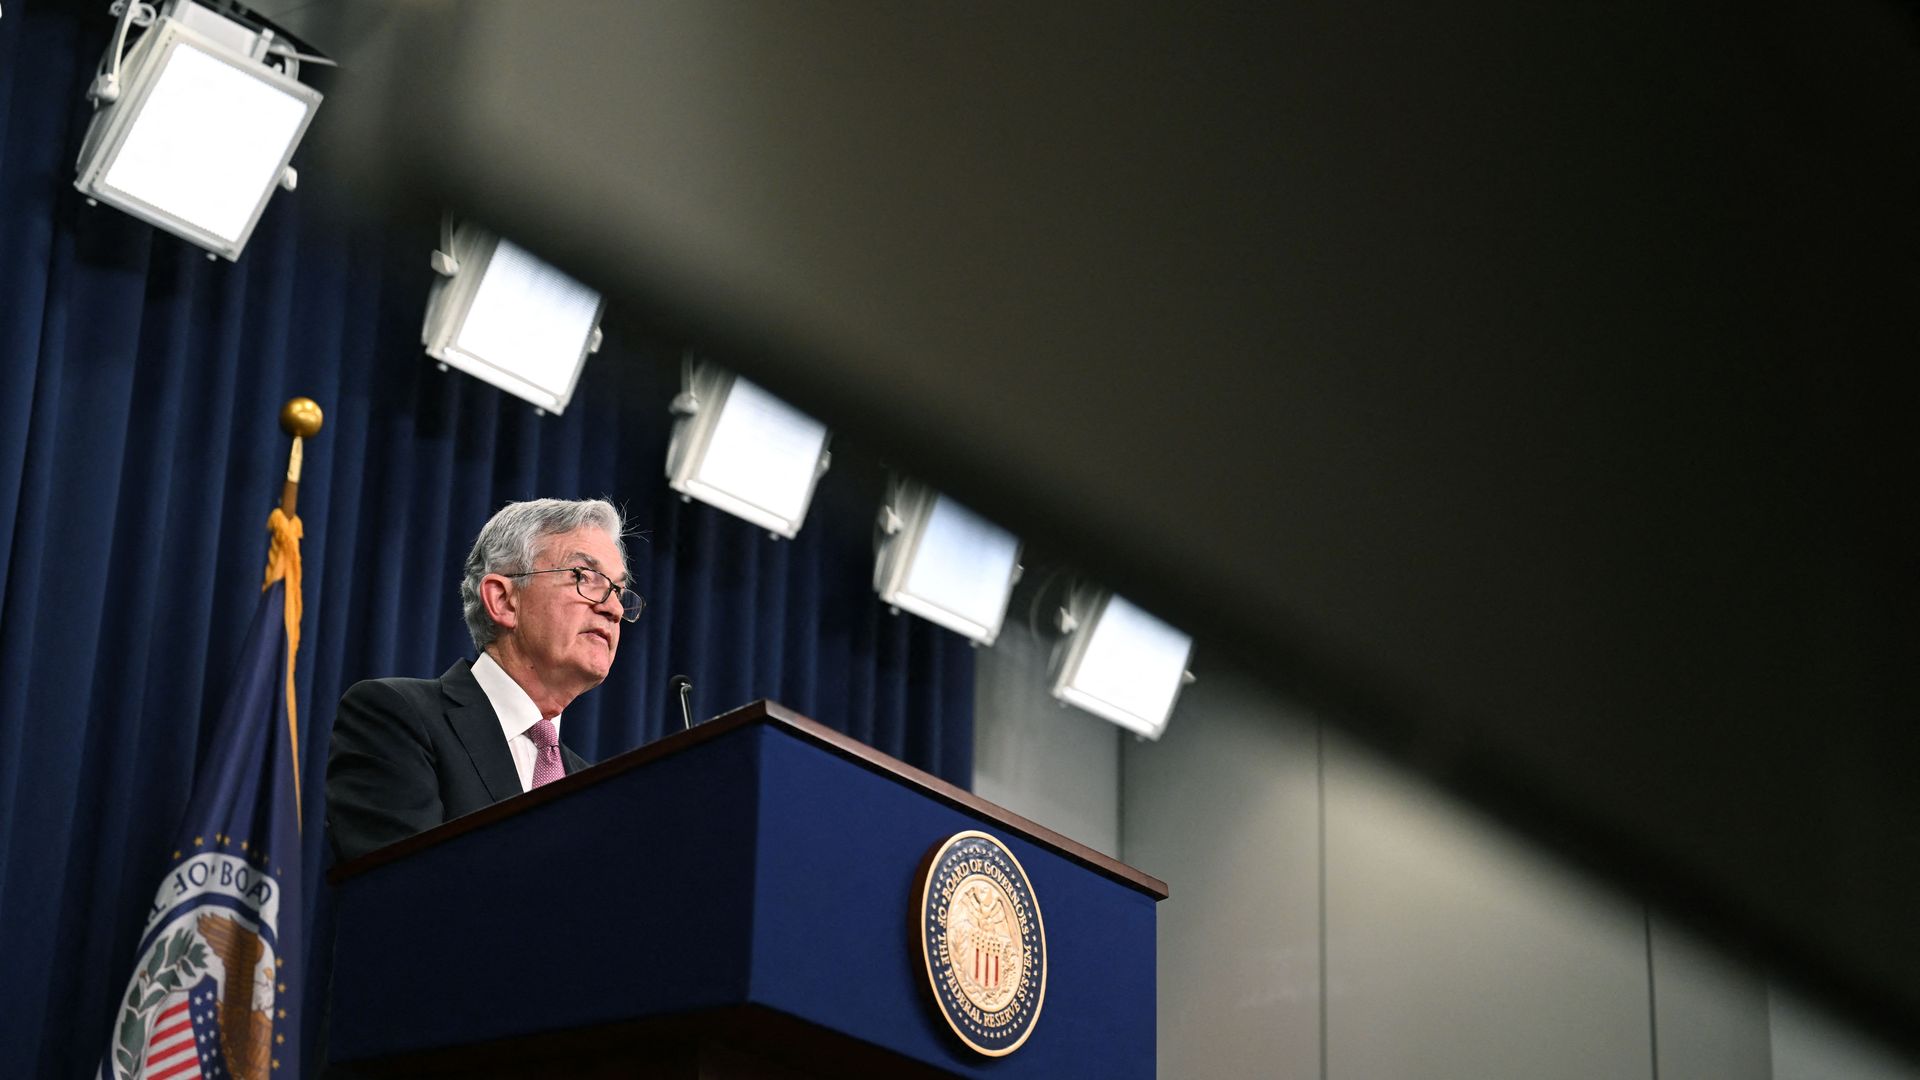 Federal Reserve Chair Jerome Powell is seen speaking during a news conference on Wednesday.